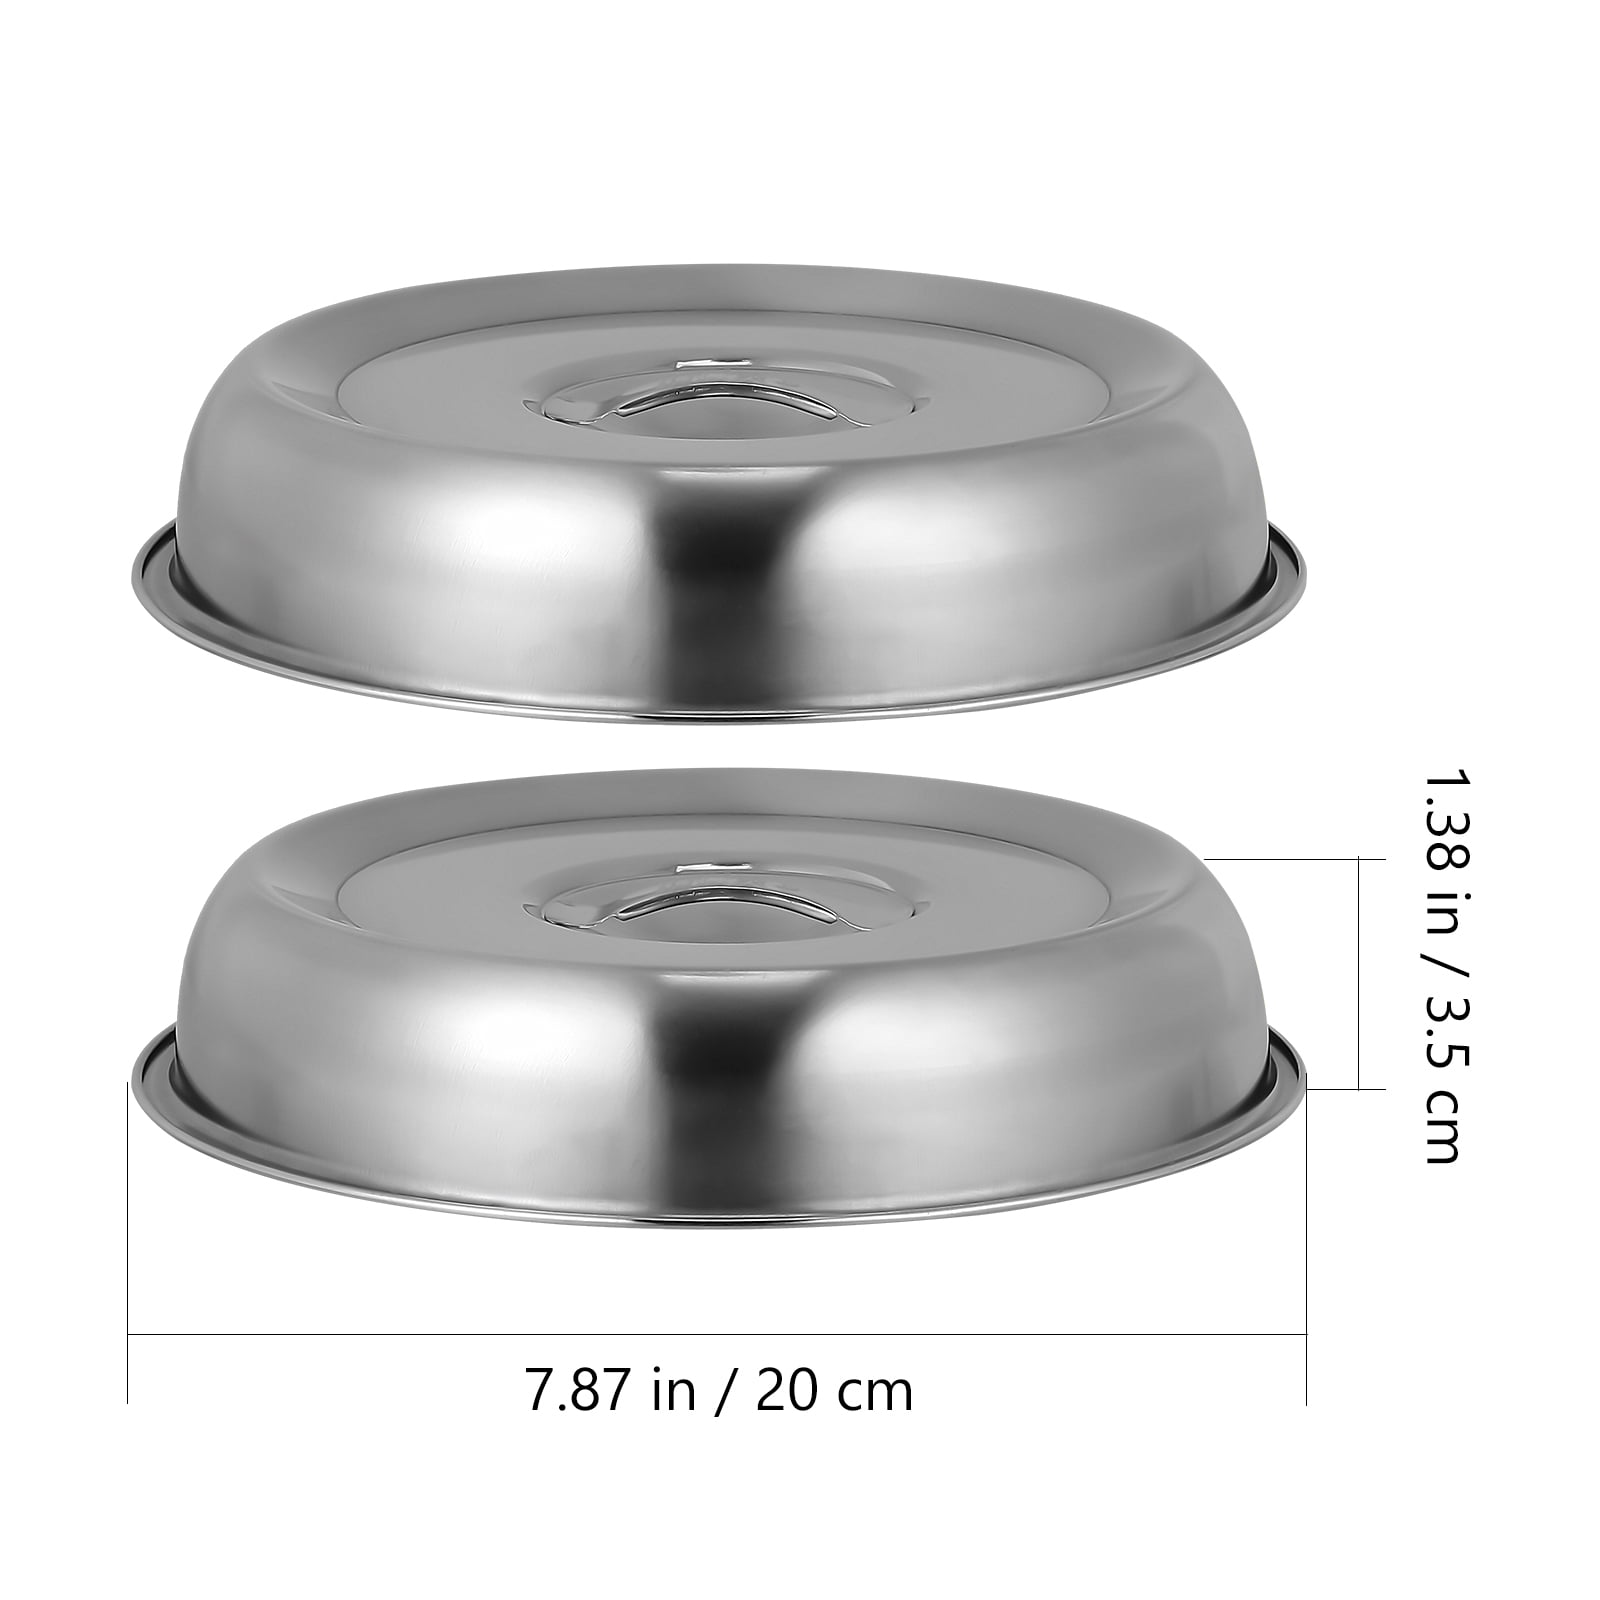 LNQ LUNIQI Stainless Steel Dish Food Cover Dome Plate Covers Steak